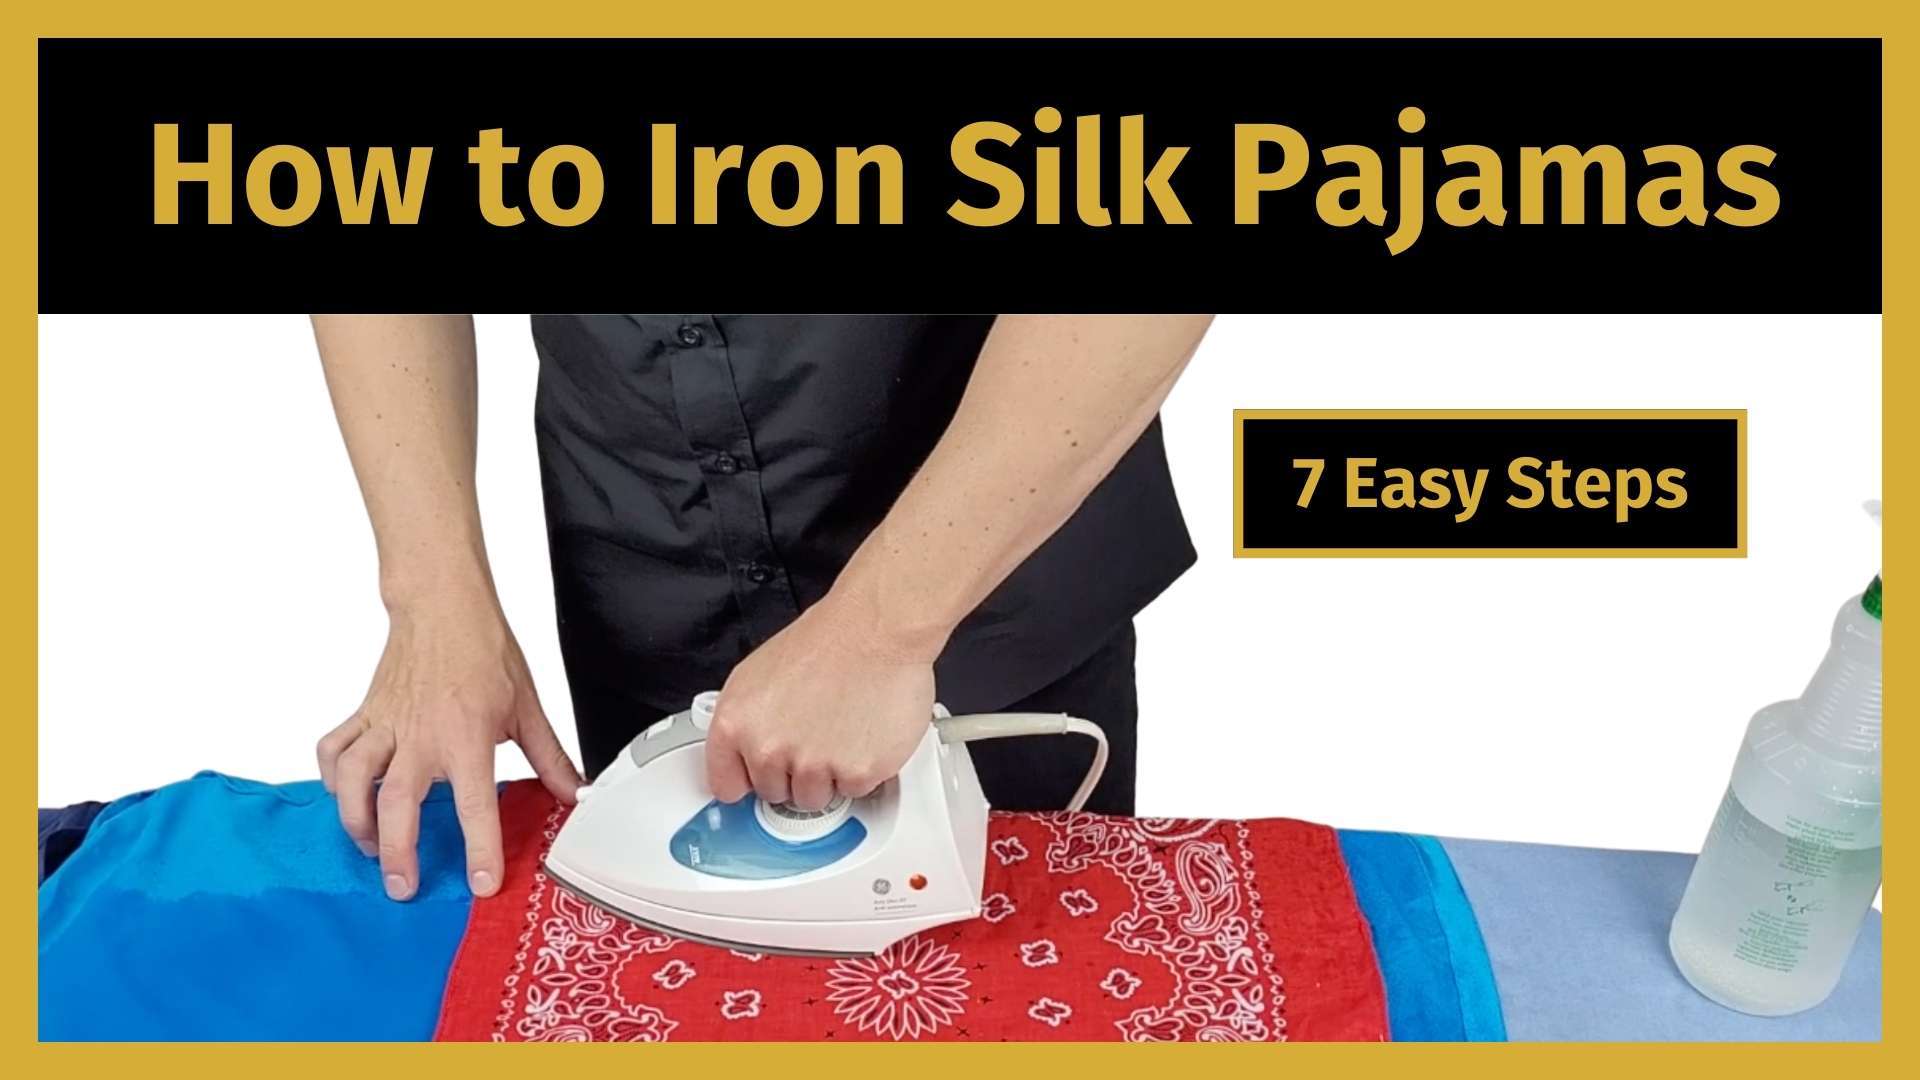 how to iron silk pajamas banner image with a photo of a man ironing a silk pajama top on an ironing board